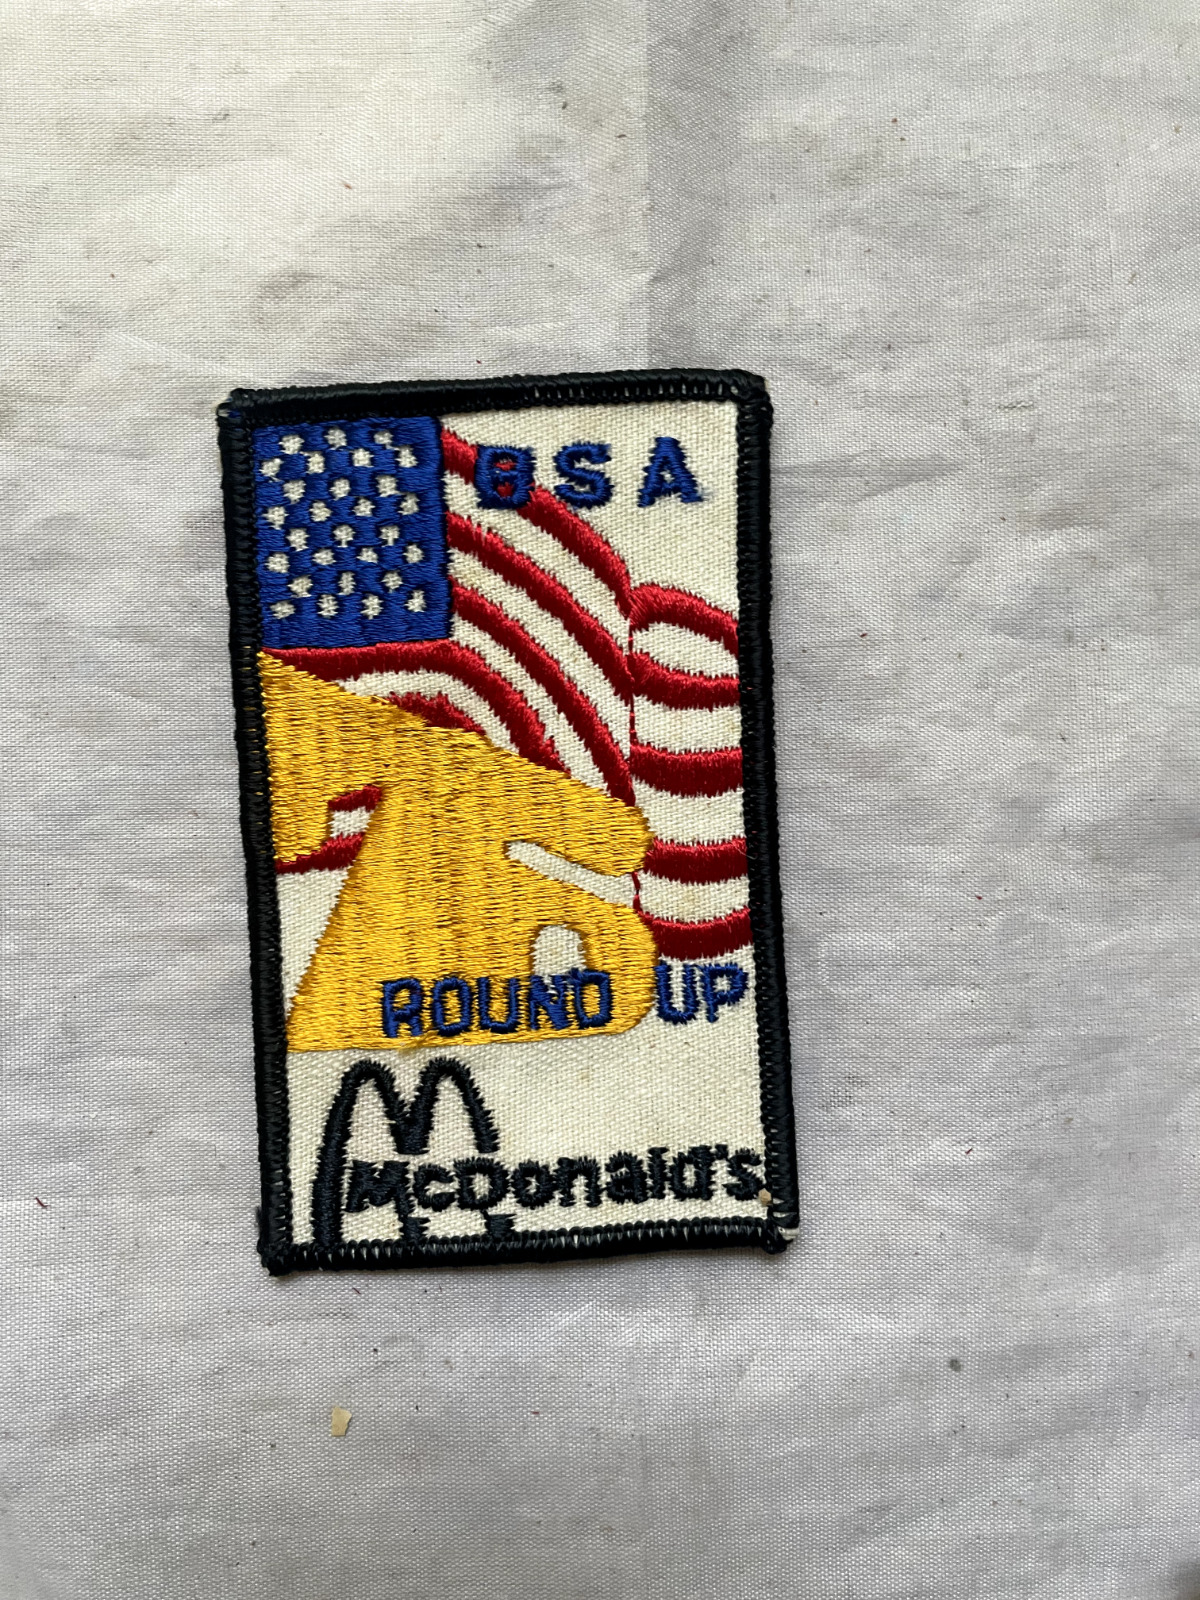 Boy Scouts Round Up McDonald's BSA Black Border Embroidered Patch